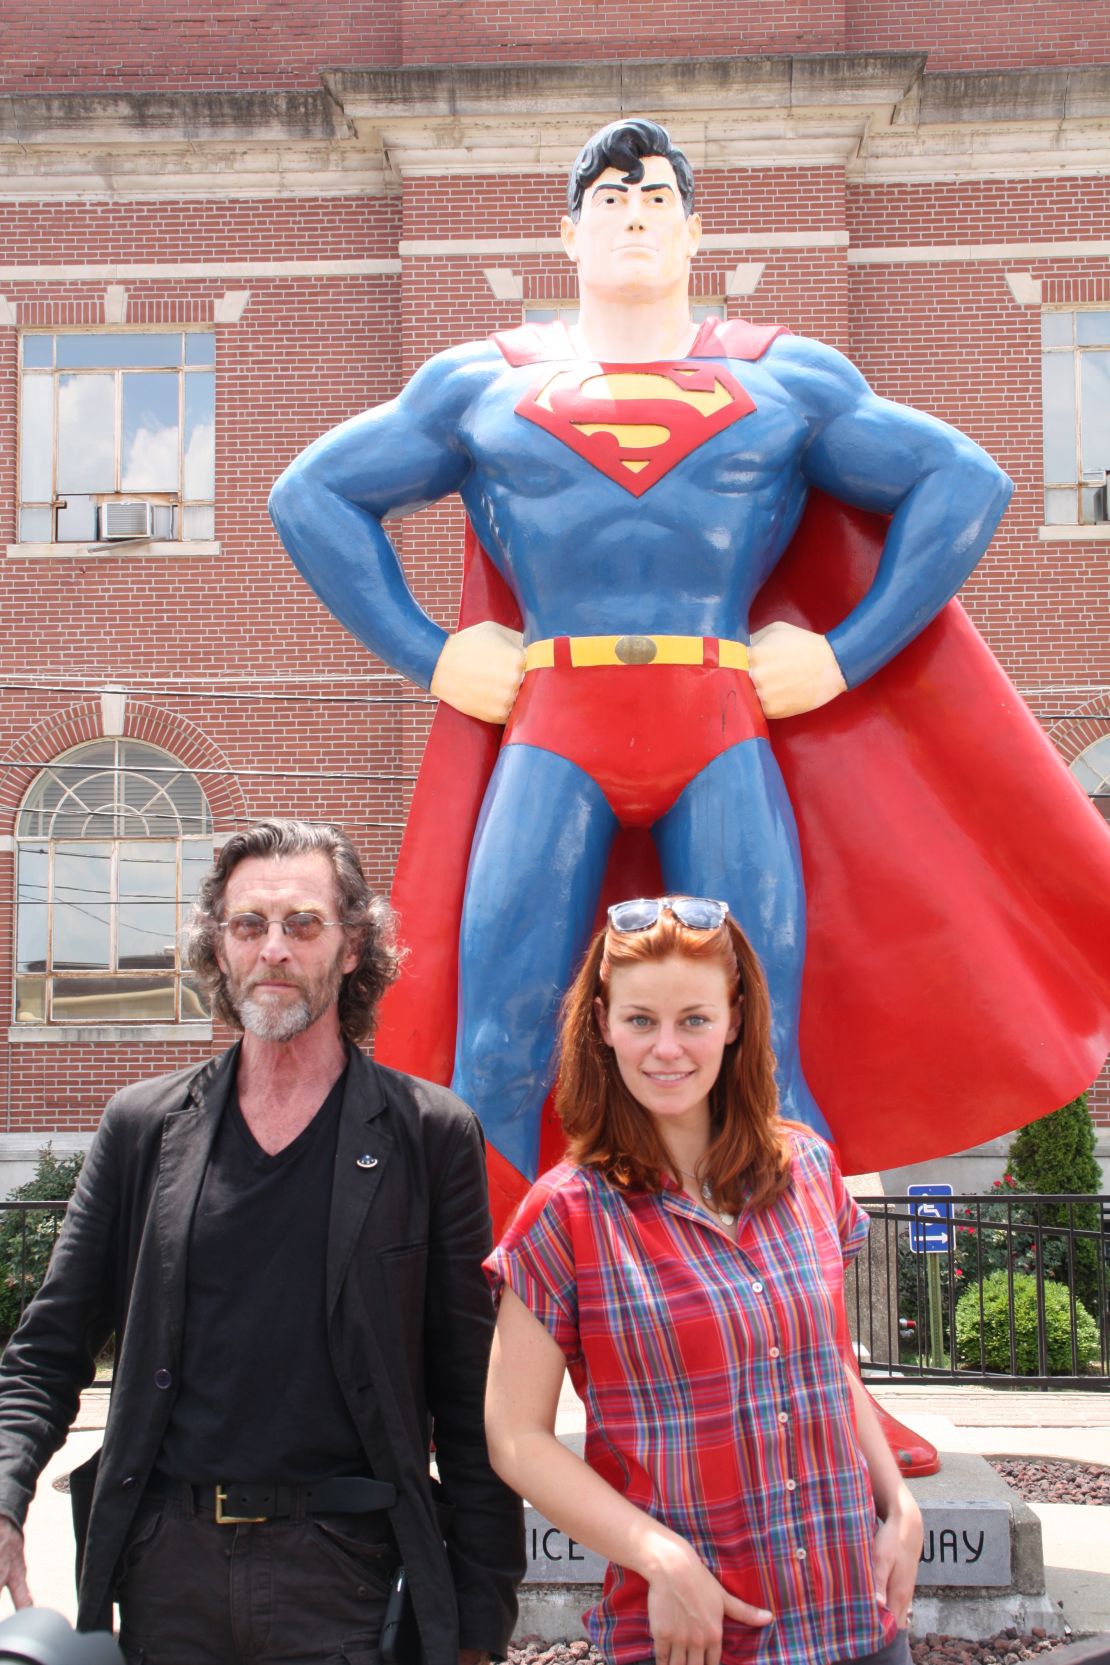 John Glover (left) and Cassidy Freeman from the series "Smallville" are just two to have posed with Superman's legs.